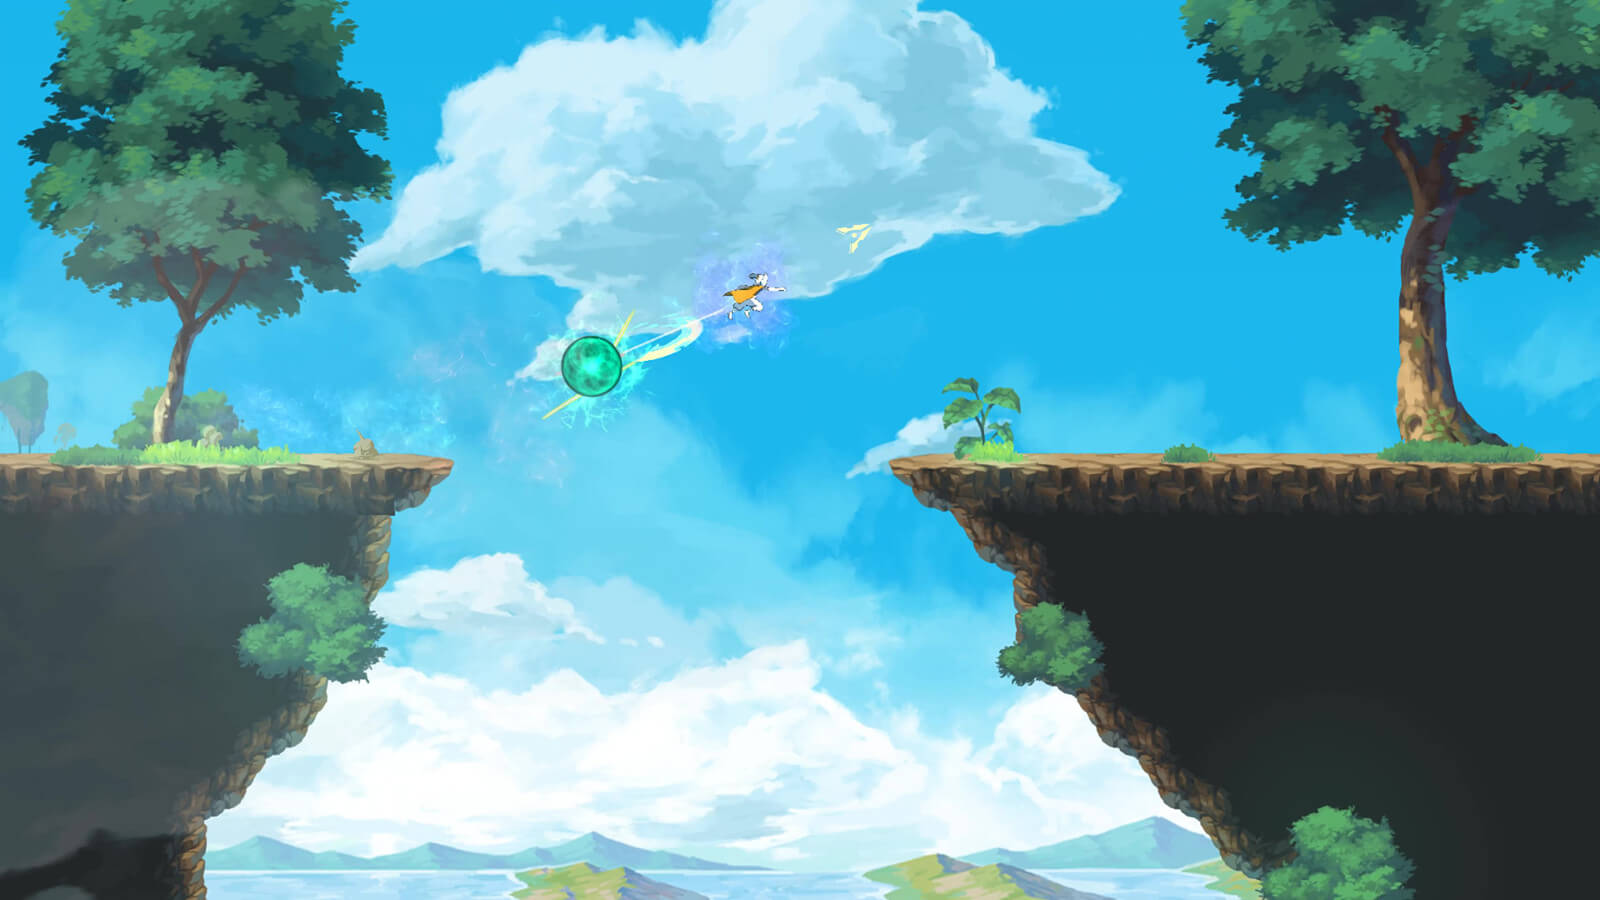 Character leaps over a chasm in the sky